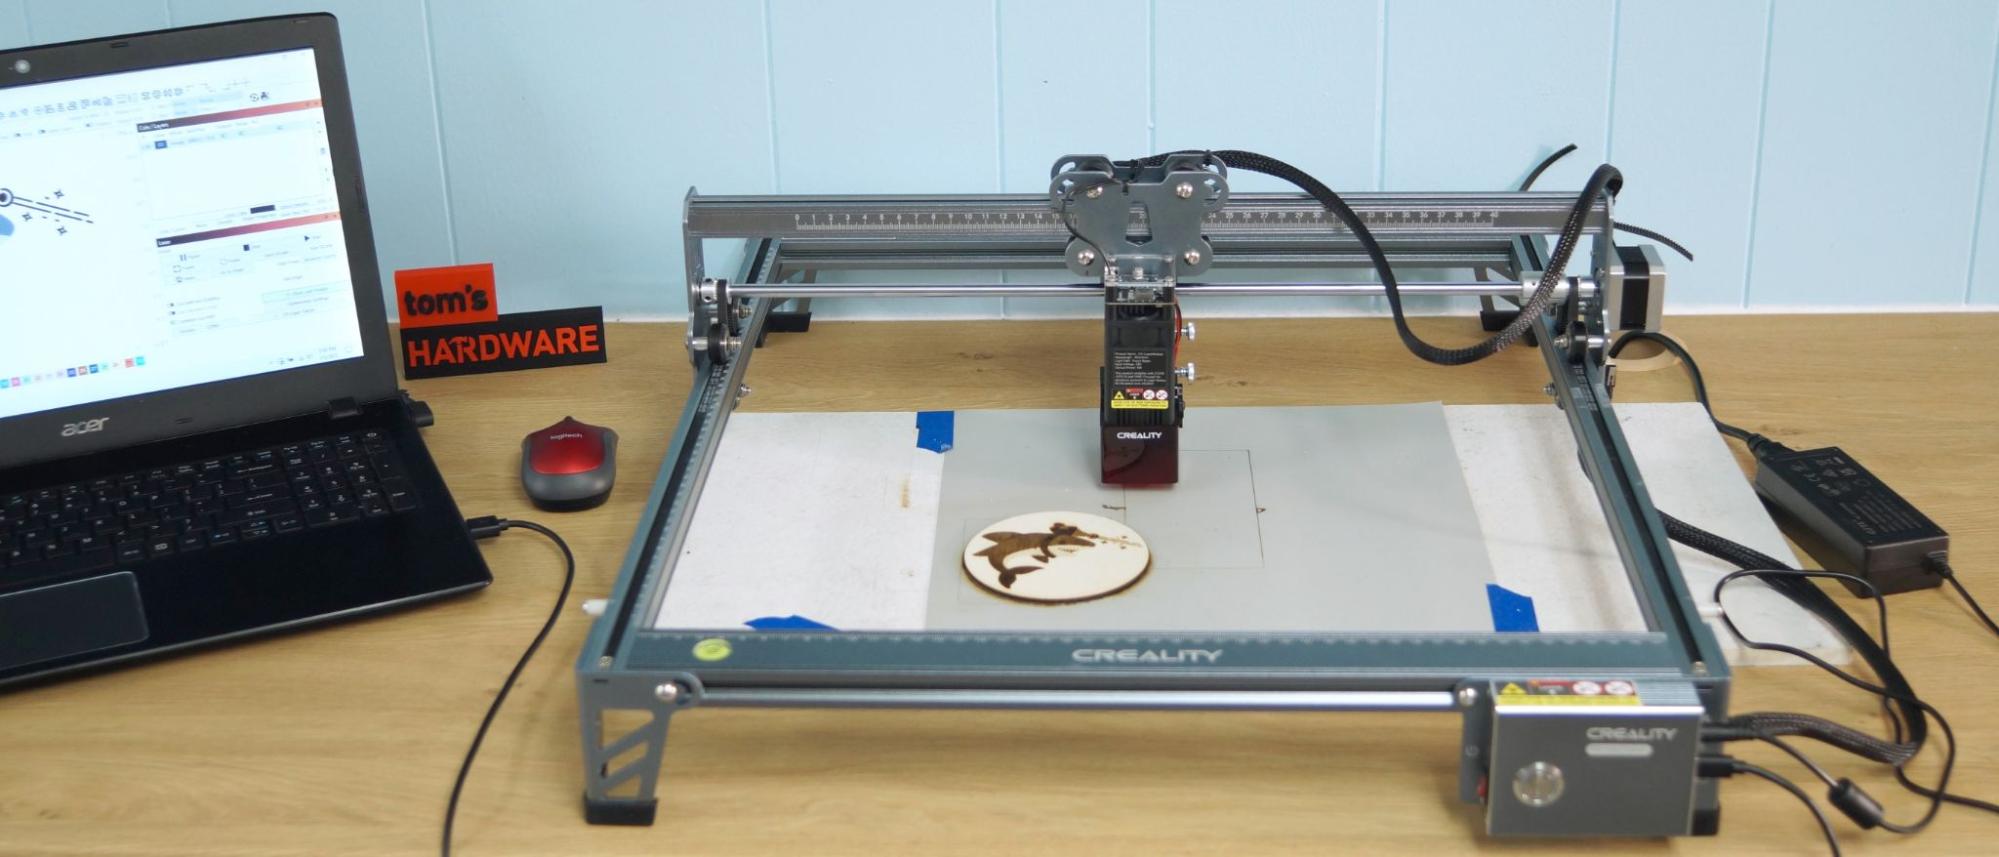 40W Creality Falcon 2 Laser Cutter / Engraver (Cuts Wood In One Pass With  Ease) 